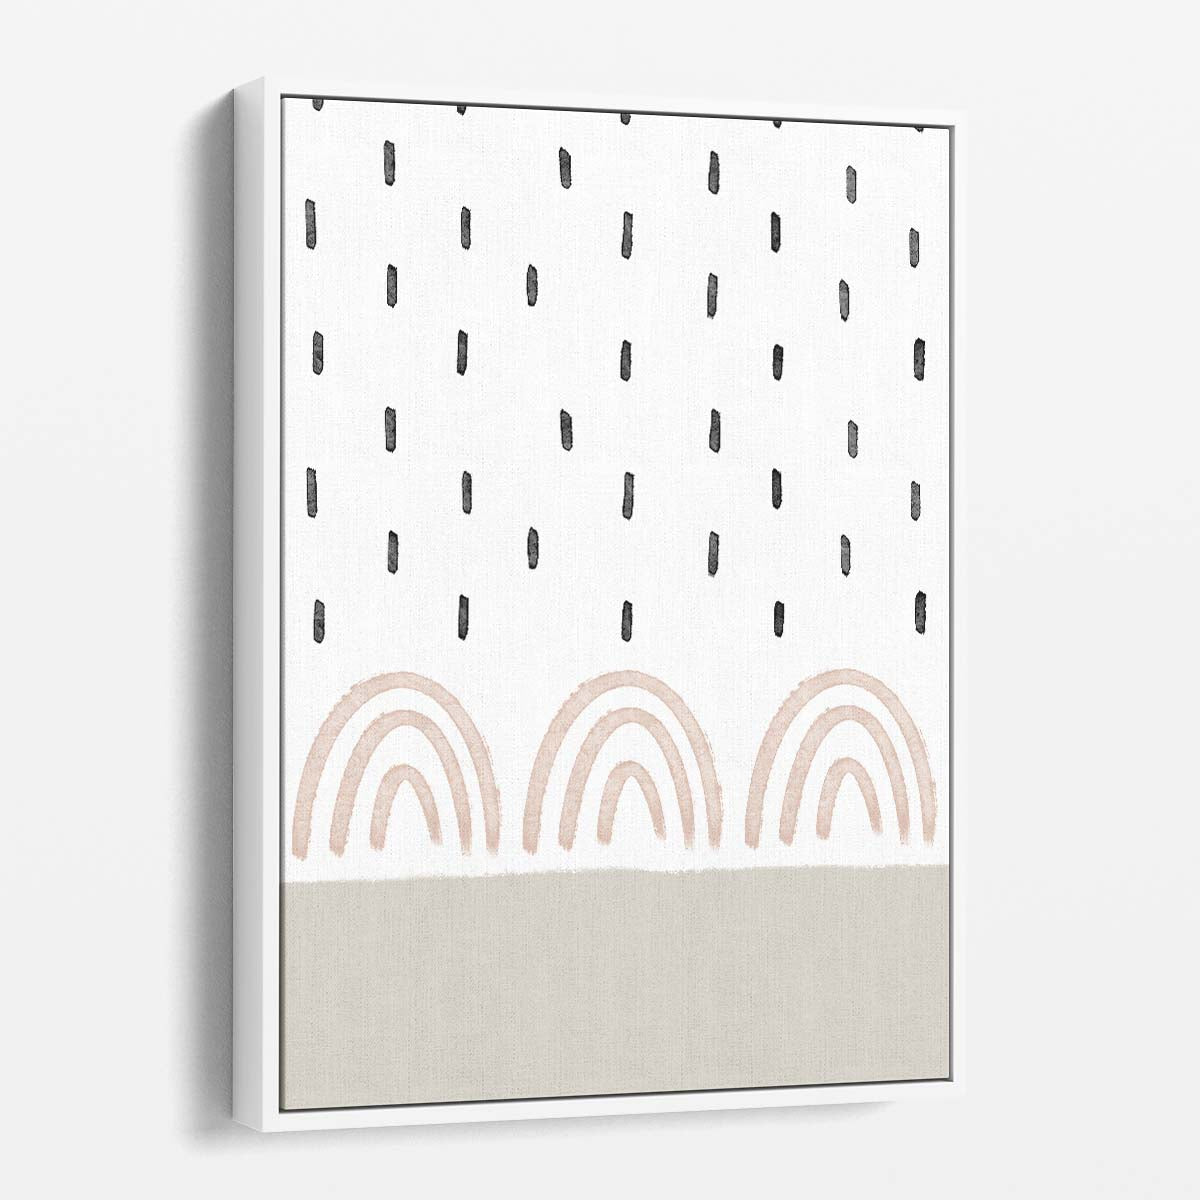 Abstract Beige Arch-Shaped Rainbows Illustration Art by Uplusmestudio by Luxuriance Designs, made in USA